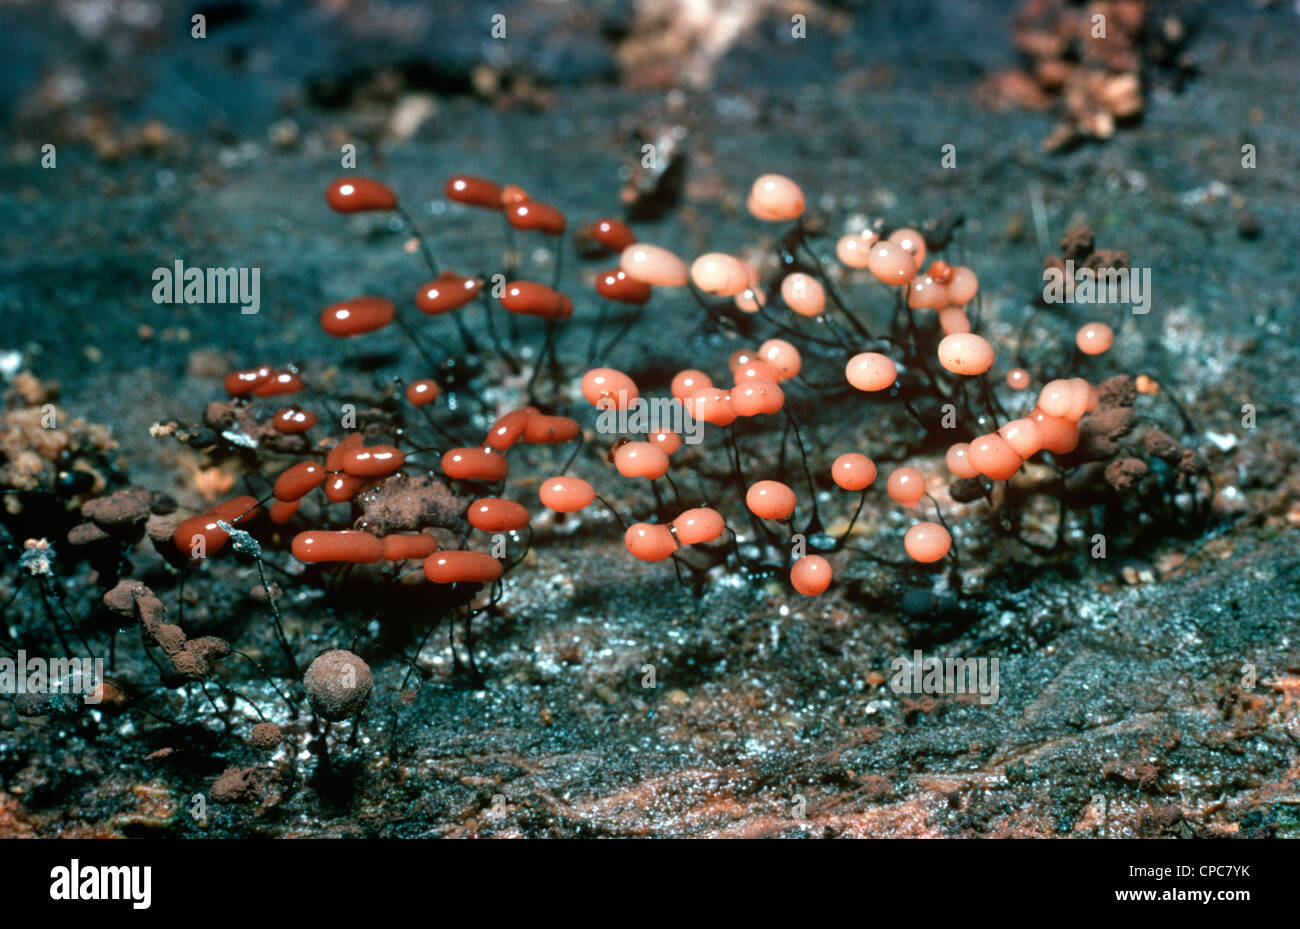 Slime mould (Comatricha nigra) myxomycete with newly forming fruiting bodies on a log UK Stock Photo